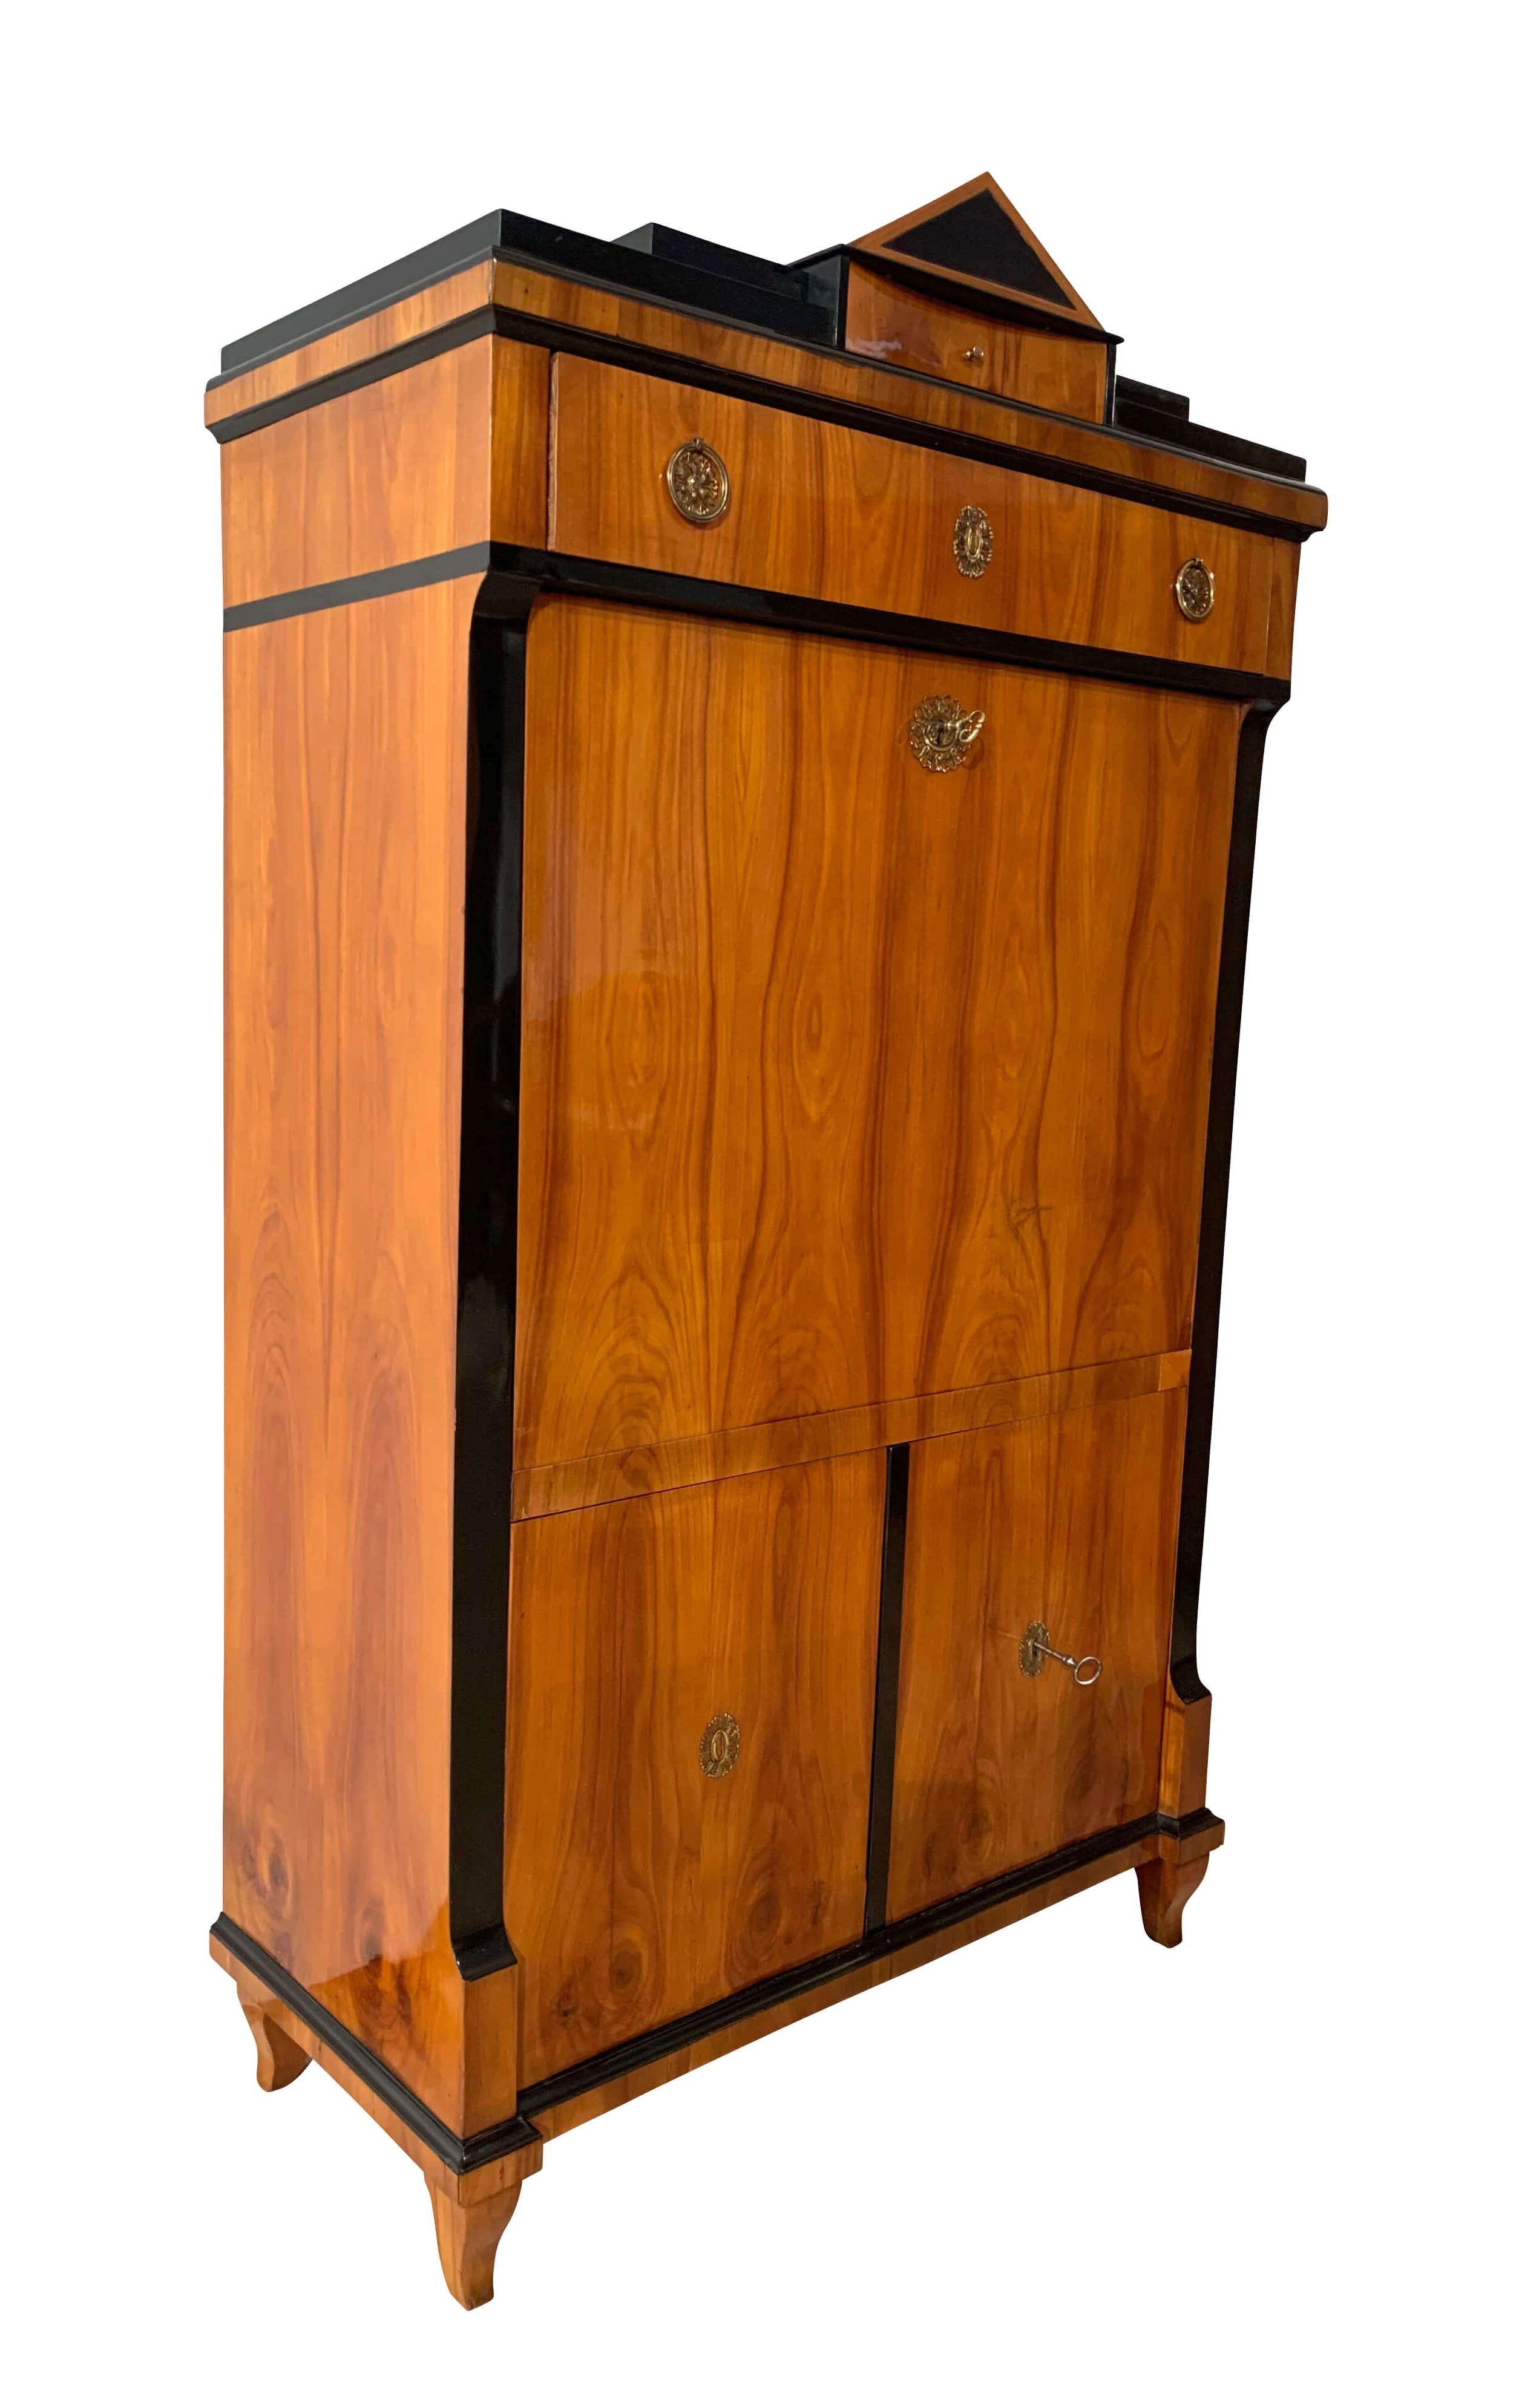 Very fine, neoclassical early Biedermeier Secretaire from South Germany around 1820.
Beautiful classicist design with gable cornice, well selected bright cherry veneer on hard and softwood (oak, maple and spruce underwood).
Book-matched veneered and